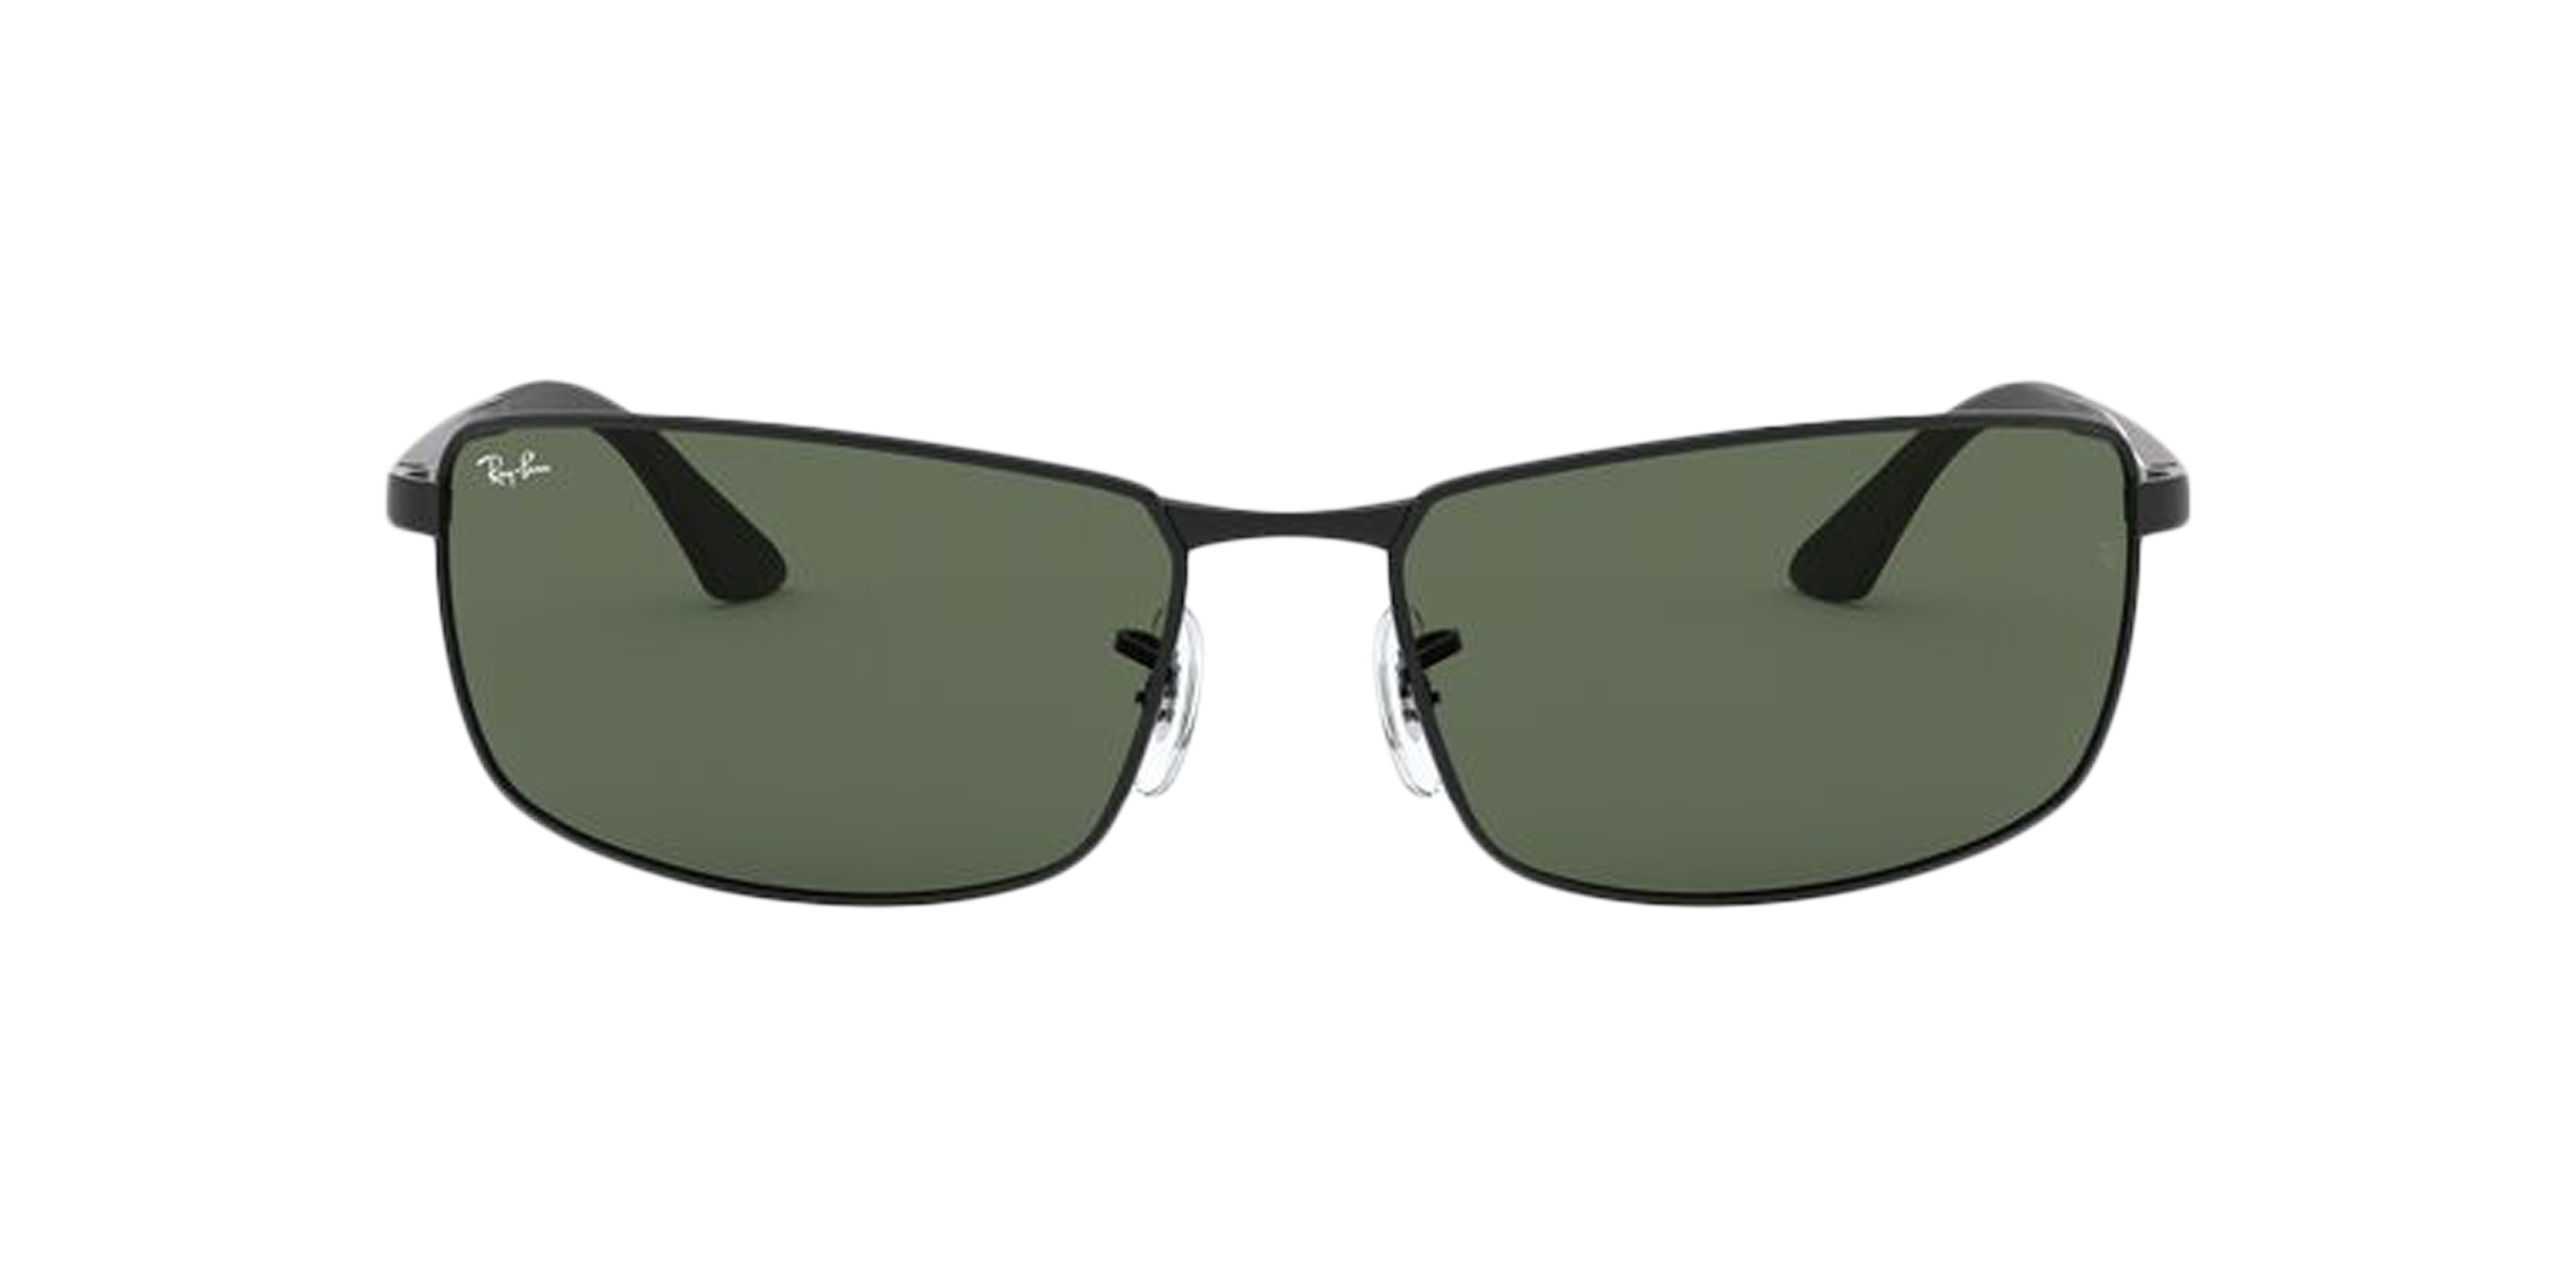 [products.image.front] Ray-Ban RB3498 002/71